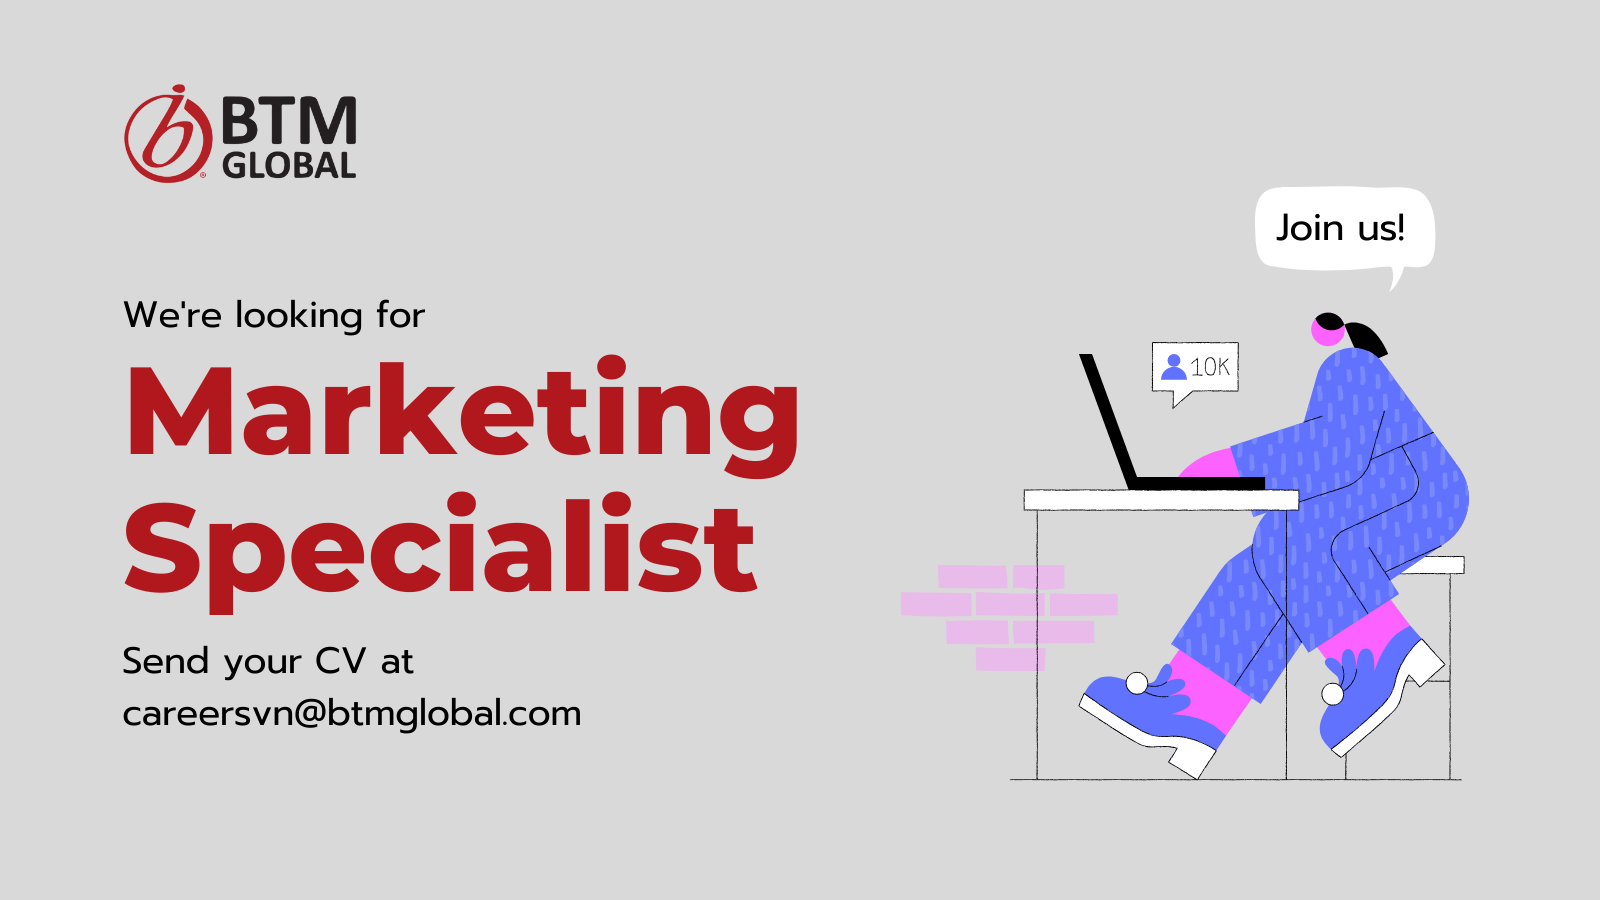 BTM Global is looking for Marketing Specialist